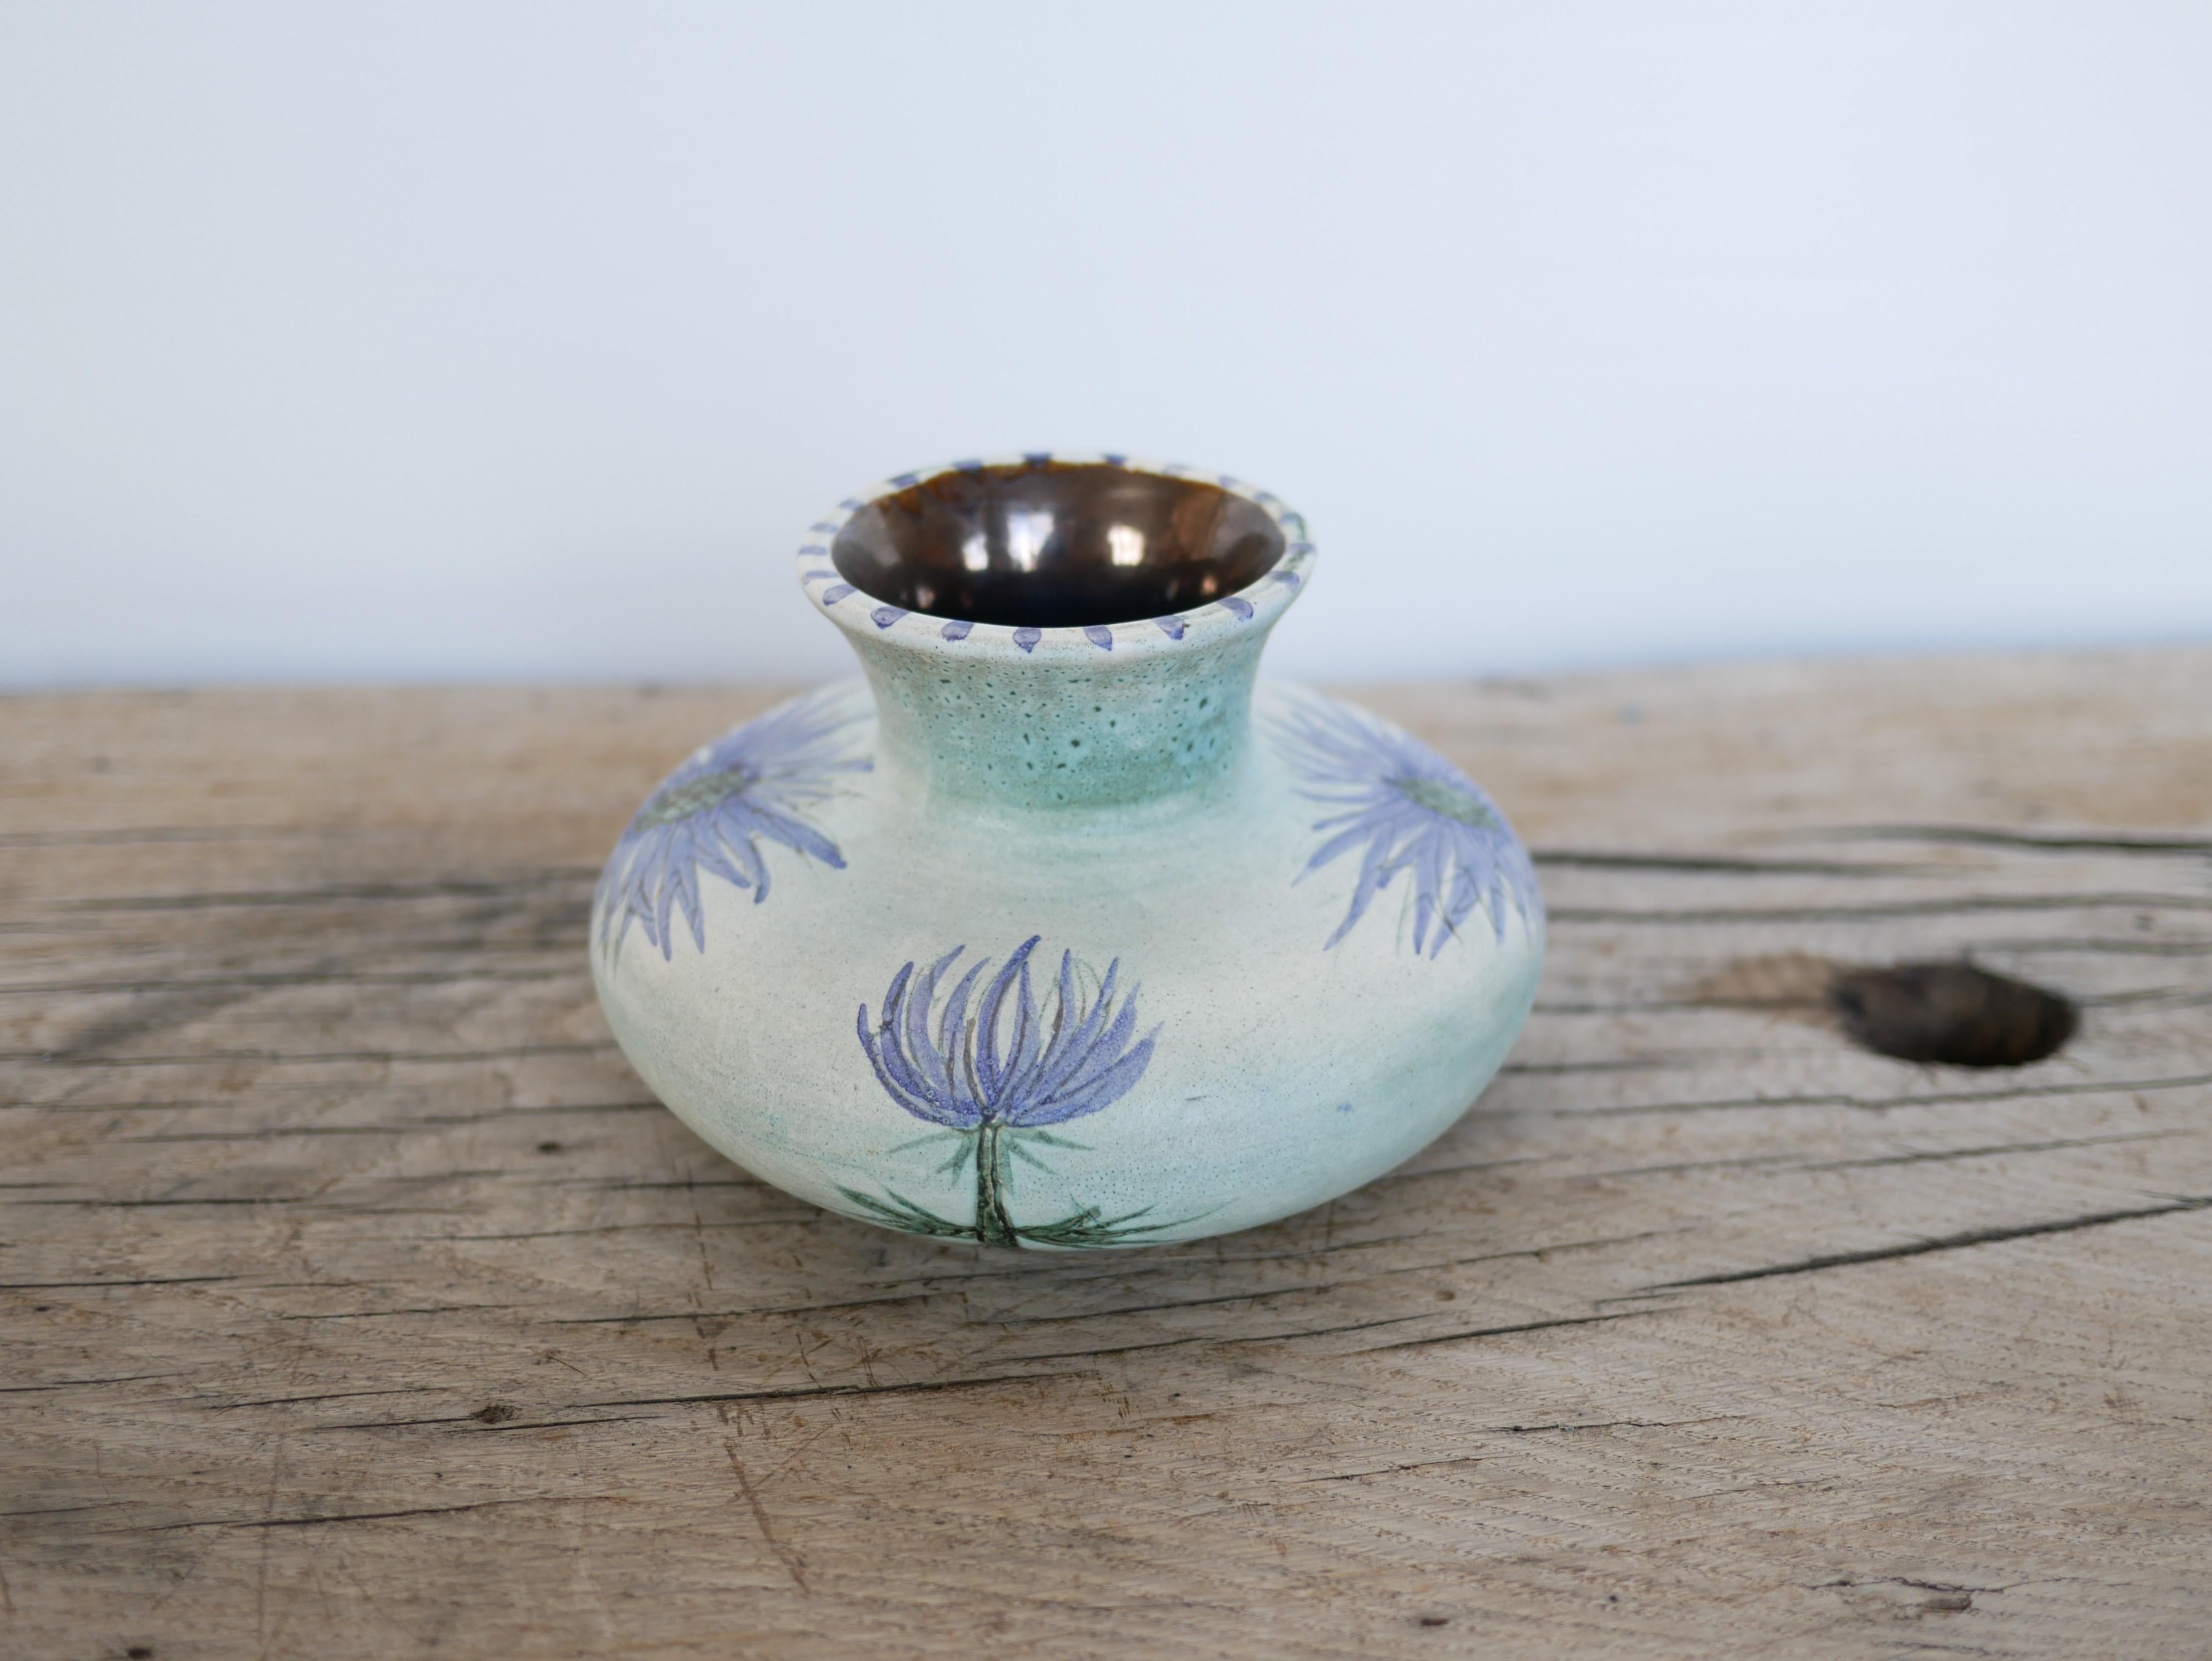 Ceramic thistle vase designed by Marie Madeleine Jolly, in the 1950s.

With its modern shape and pretty color, this ceramic will be perfect in a natural, refined and delicate decoration.
We simply imagine it placed on a shelf or a piece of